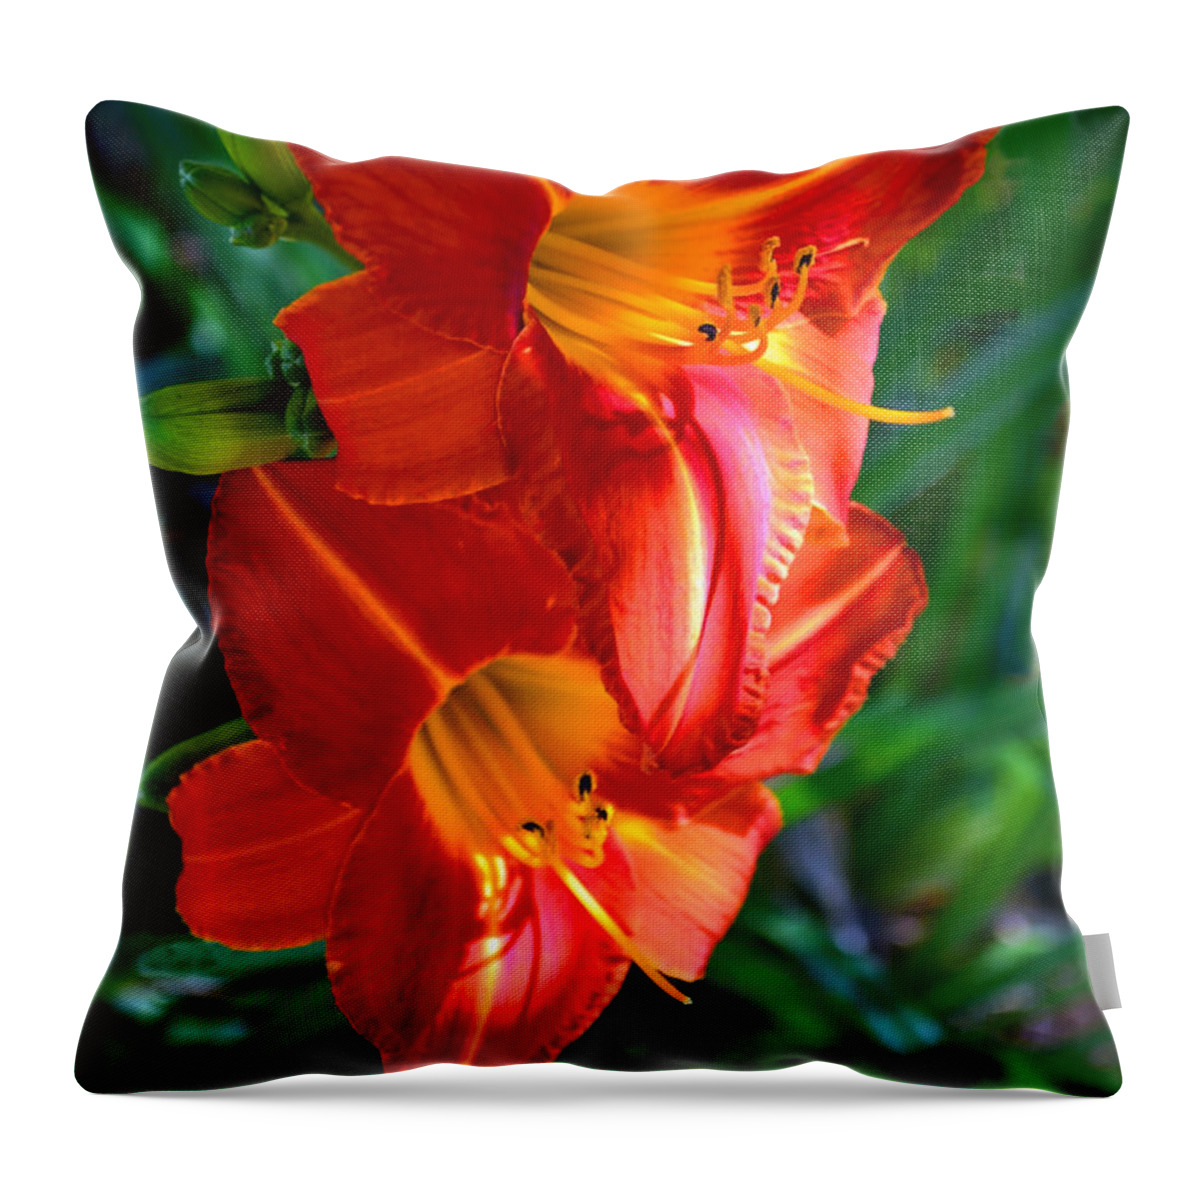 Lilies Throw Pillow featuring the photograph Twins by Sandi OReilly